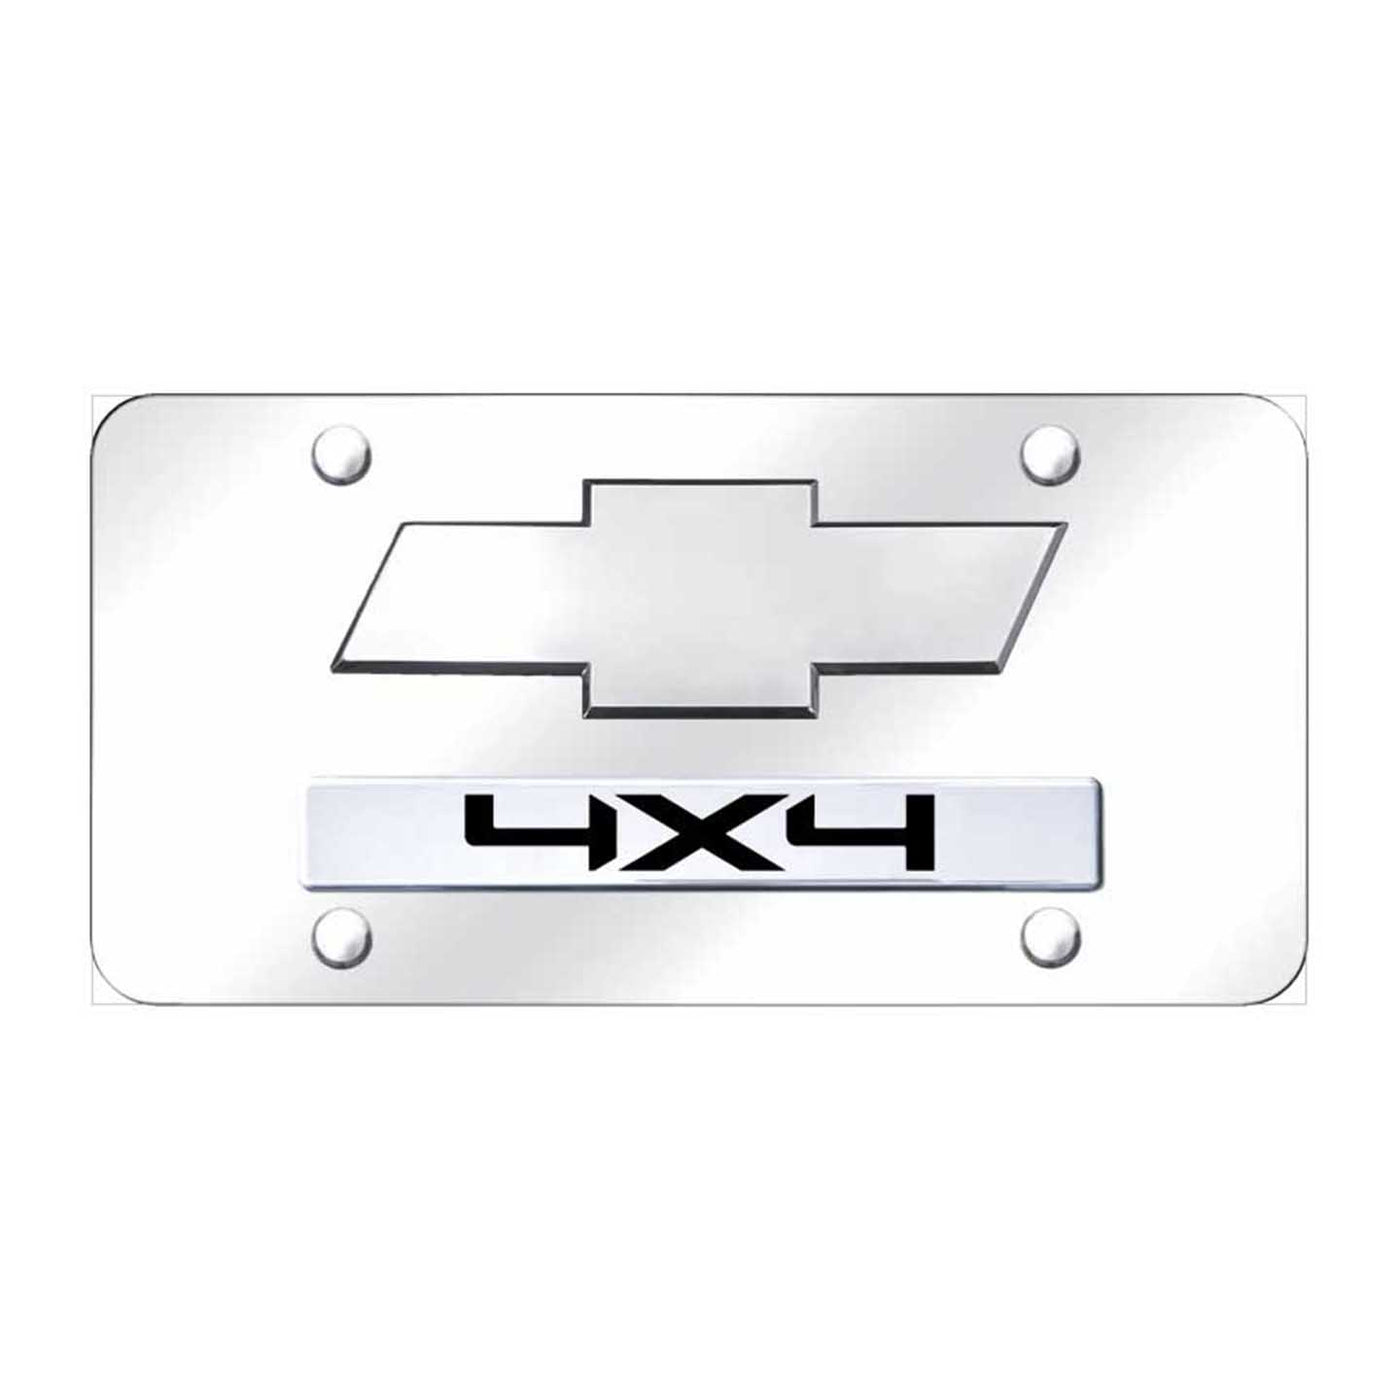 Dual Chevy/4X4 (New) License Plate - Chrome on Mirrored